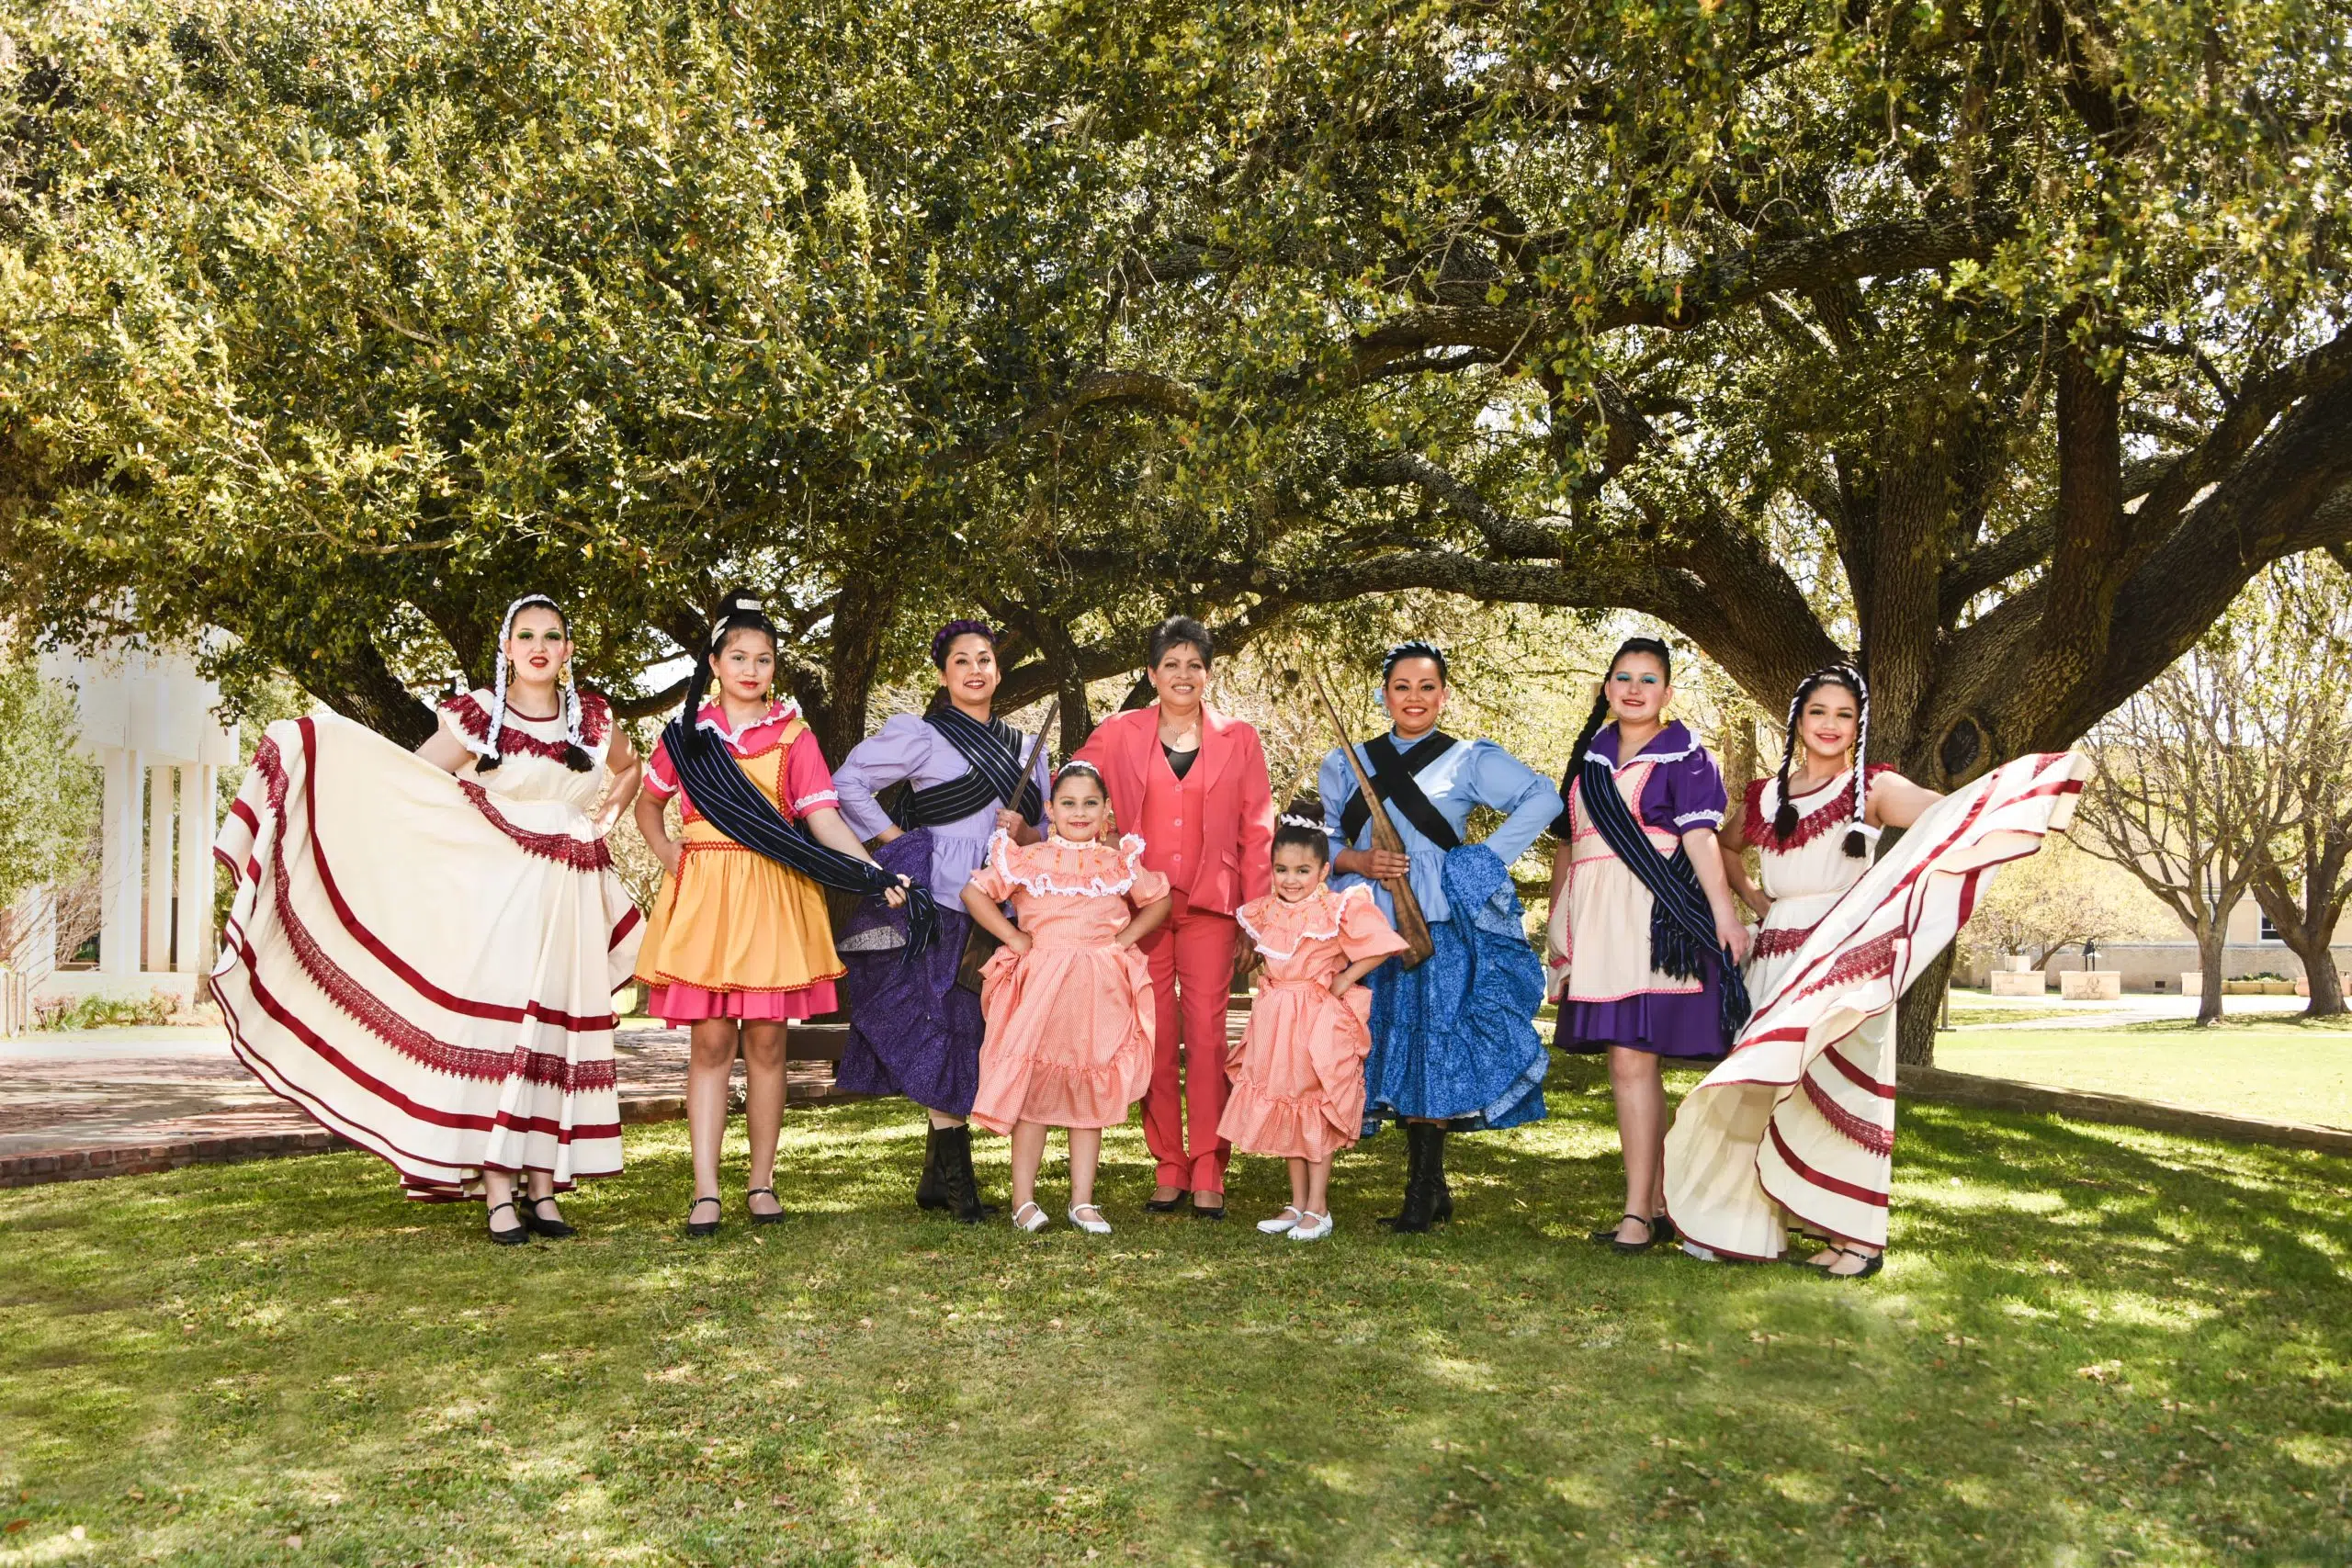 Mexican American roots, customs, traditions to be celebrated this weekend during Teatro's 40th anniversary recital plus Cinco de Mayo celebration